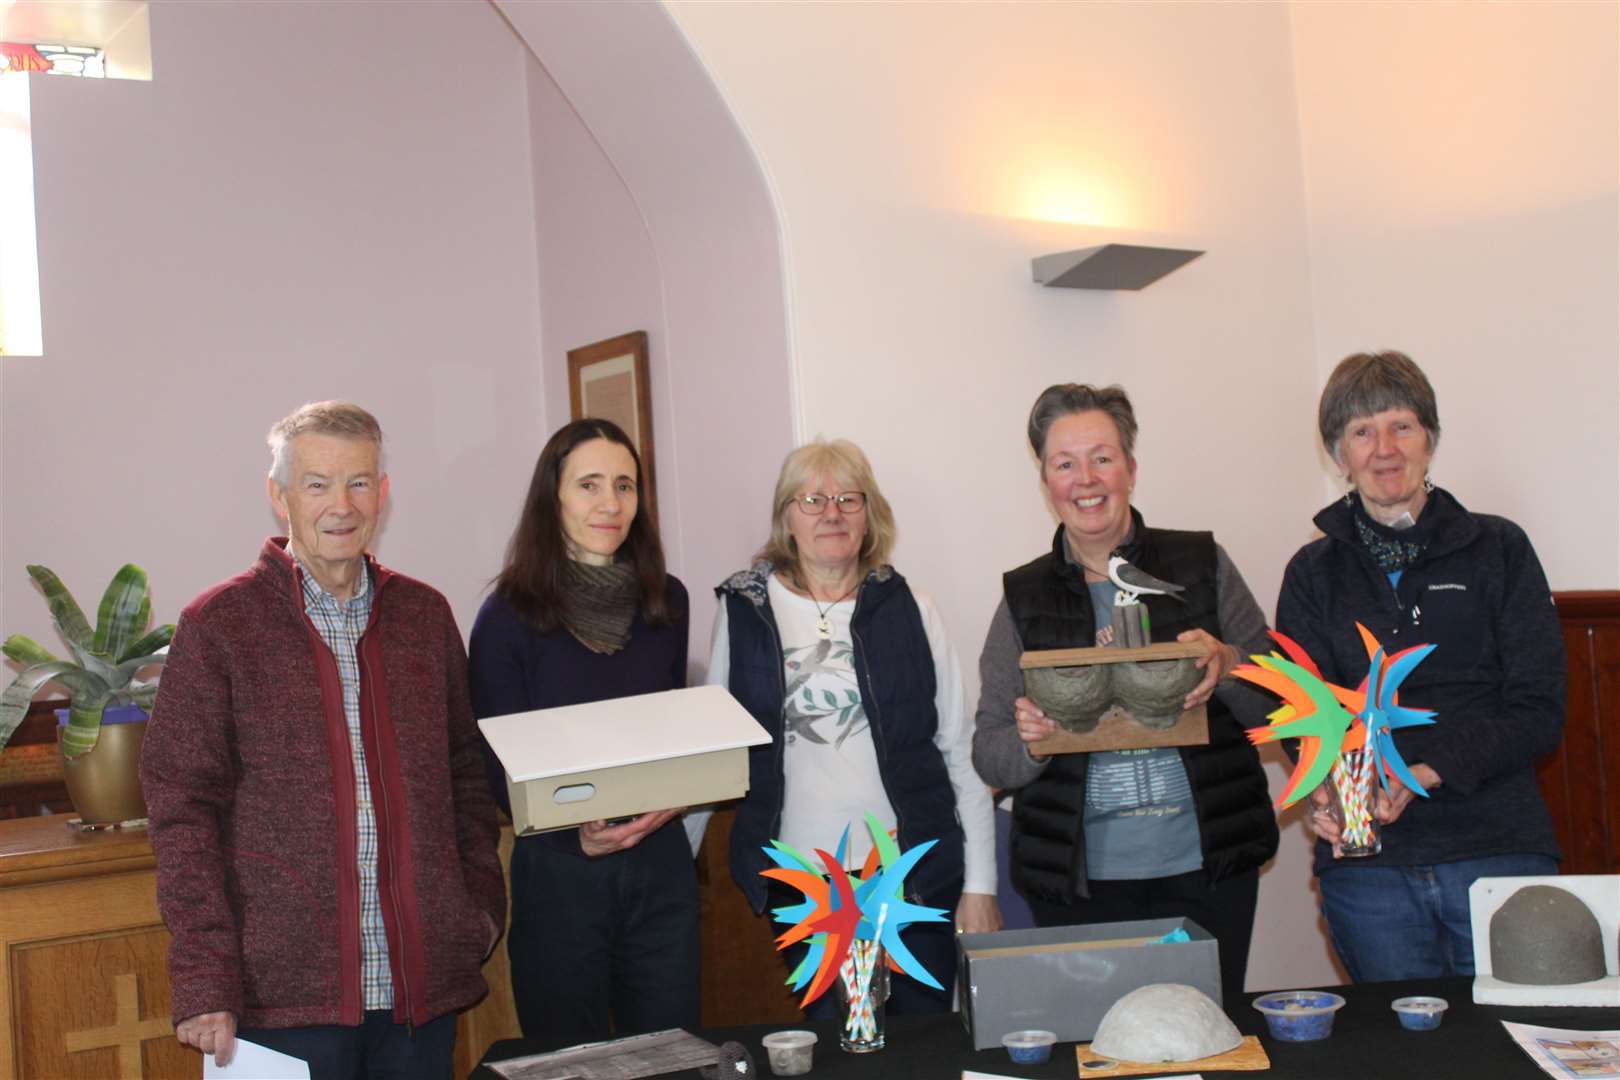 Keen visitor to the Swifts and Us event at West Parish church (left) Graham Coe, NES Swifts members Hannah Turner holding nesting box, founder Cally Smith, Karen De Rijck and Kemnay representative Liz Mckay at Wednesday's climate week event at West parish church, West High Street, Inverurie. Picture:Griselda McGregor